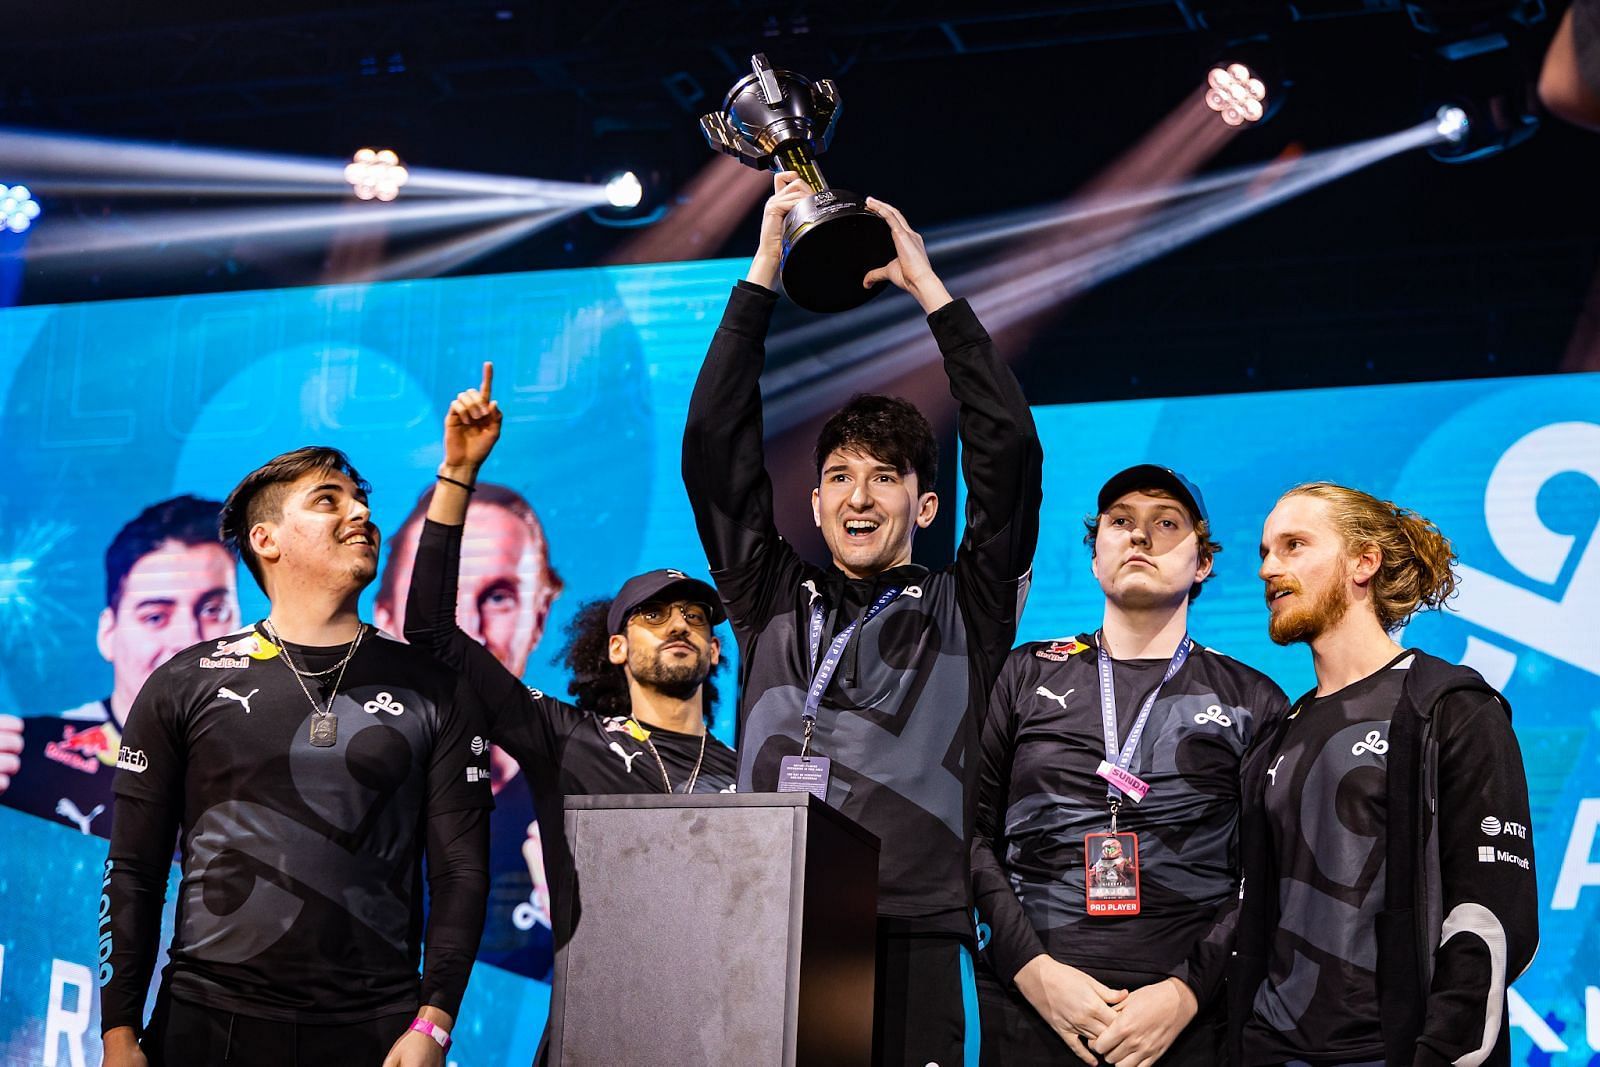 Cloud9 crowned Halo Infinite Champions at Halo Championship Series 2021